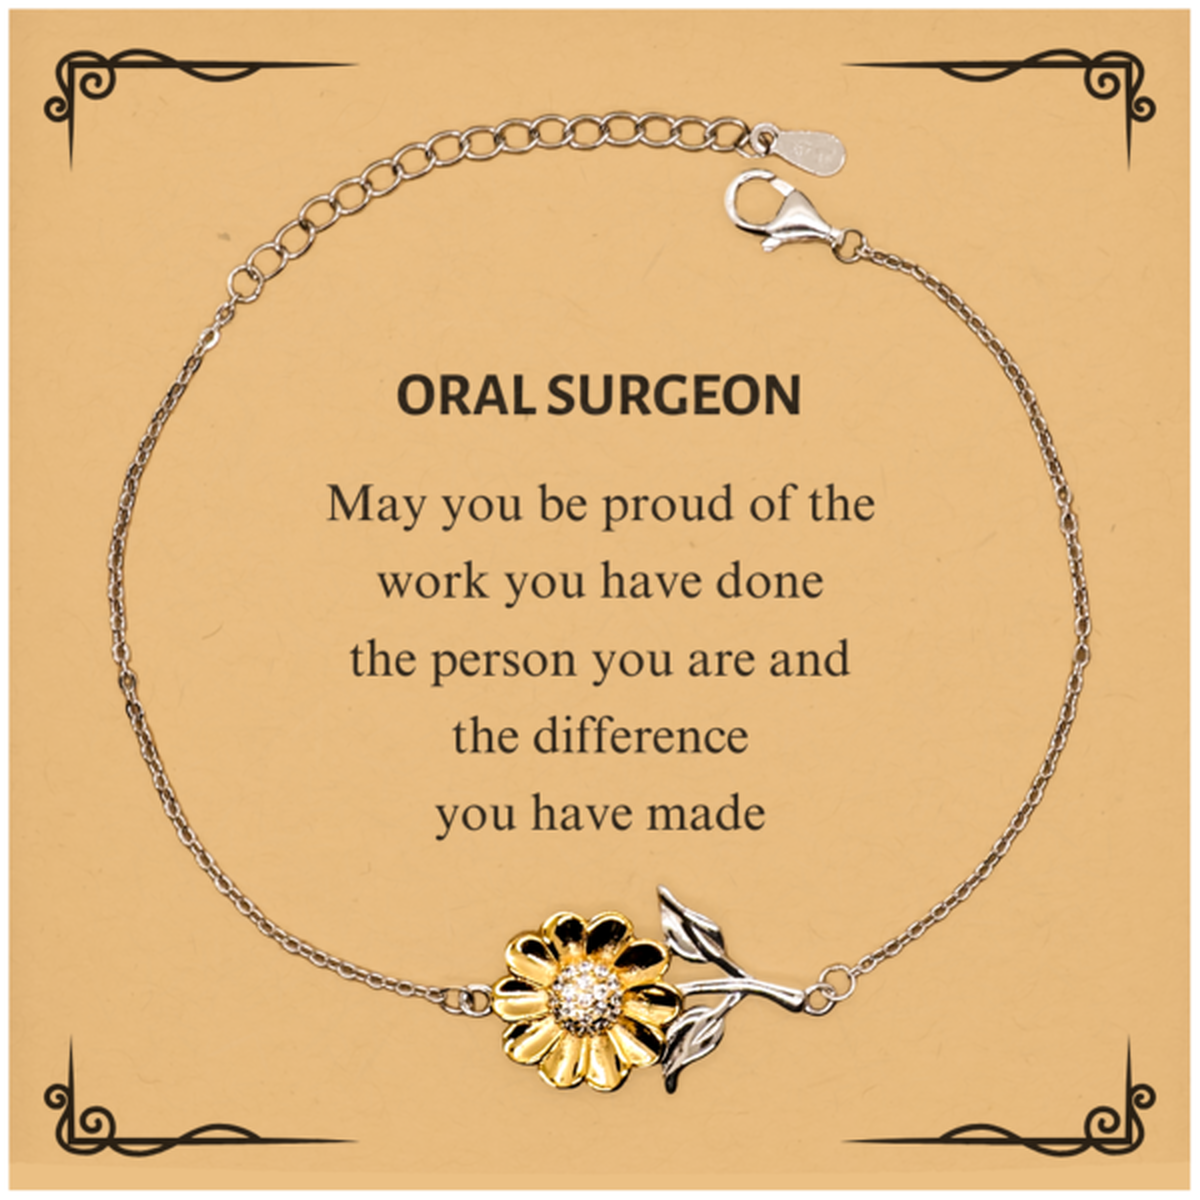 Oral Surgeon May you be proud of the work you have done, Retirement Oral Surgeon Sunflower Bracelet for Colleague Appreciation Gifts Amazing for Oral Surgeon